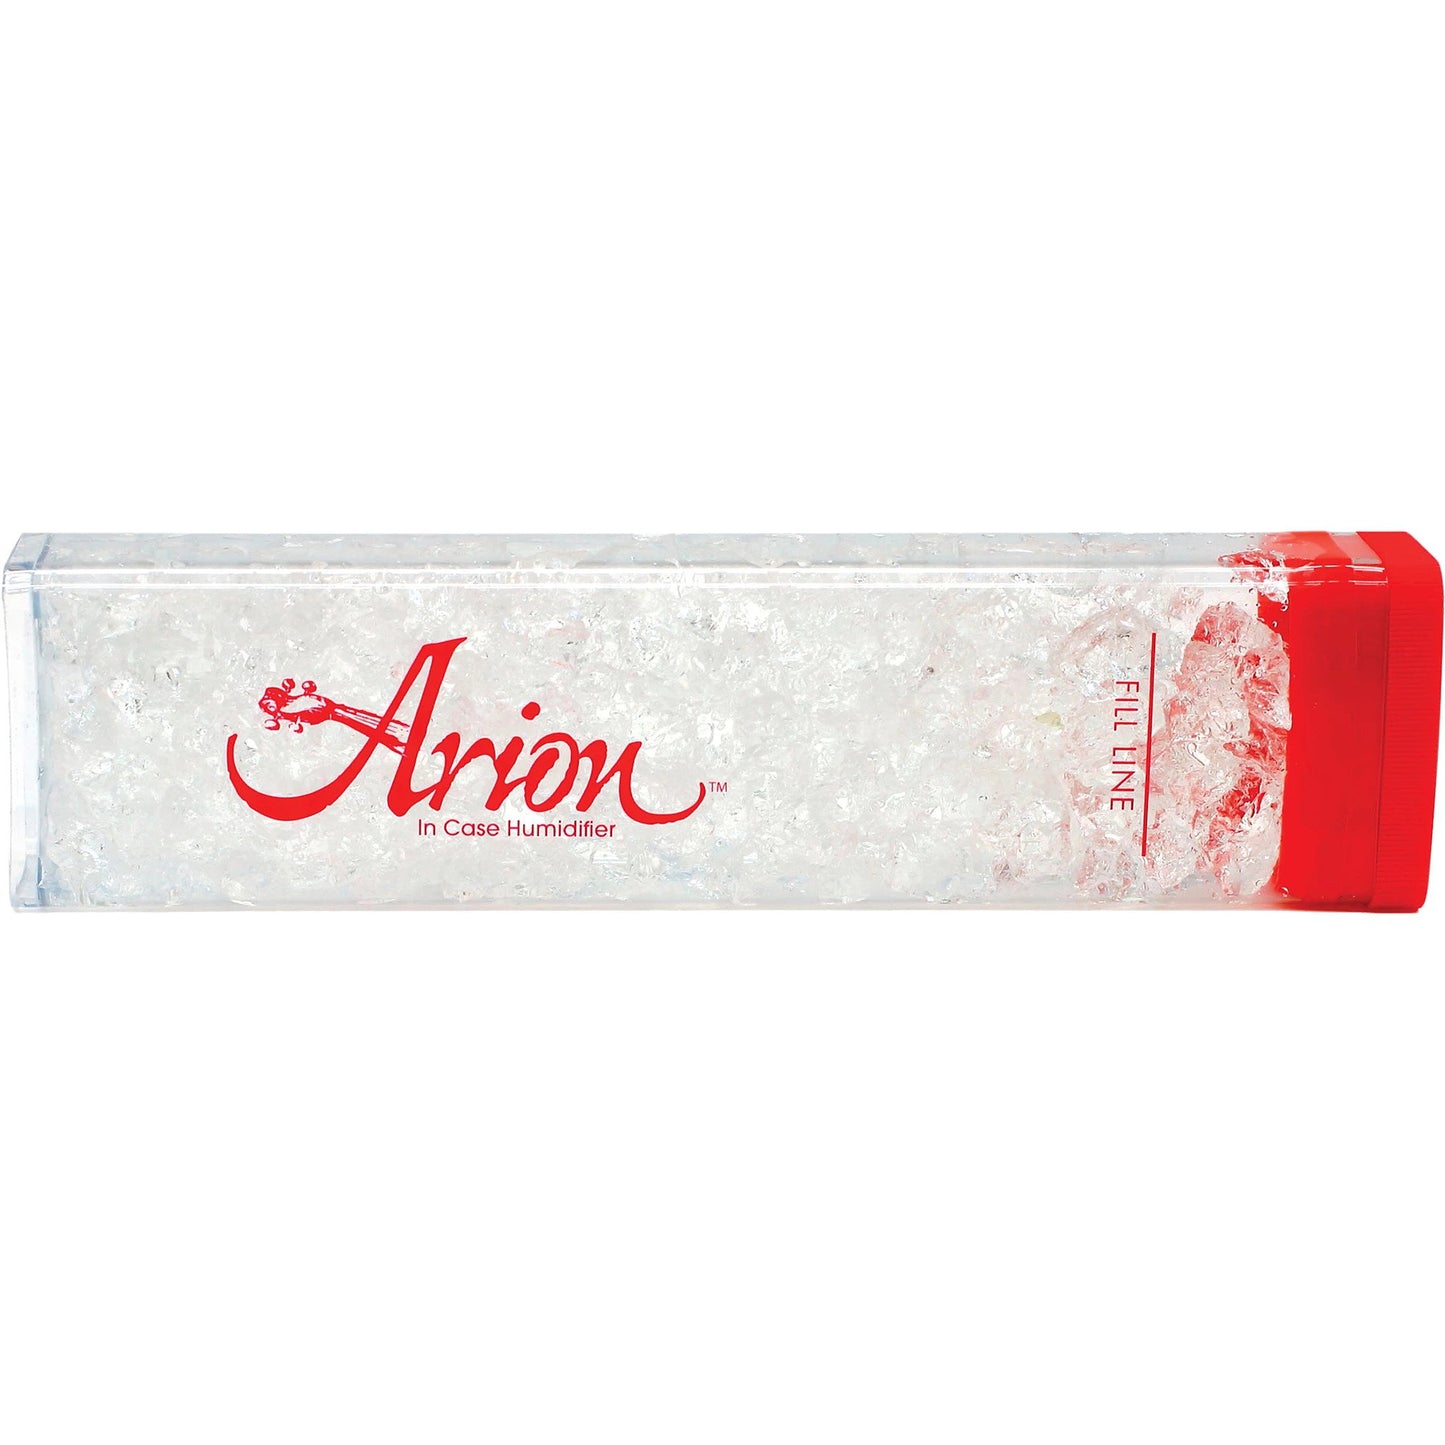 Arion Case Humidifier